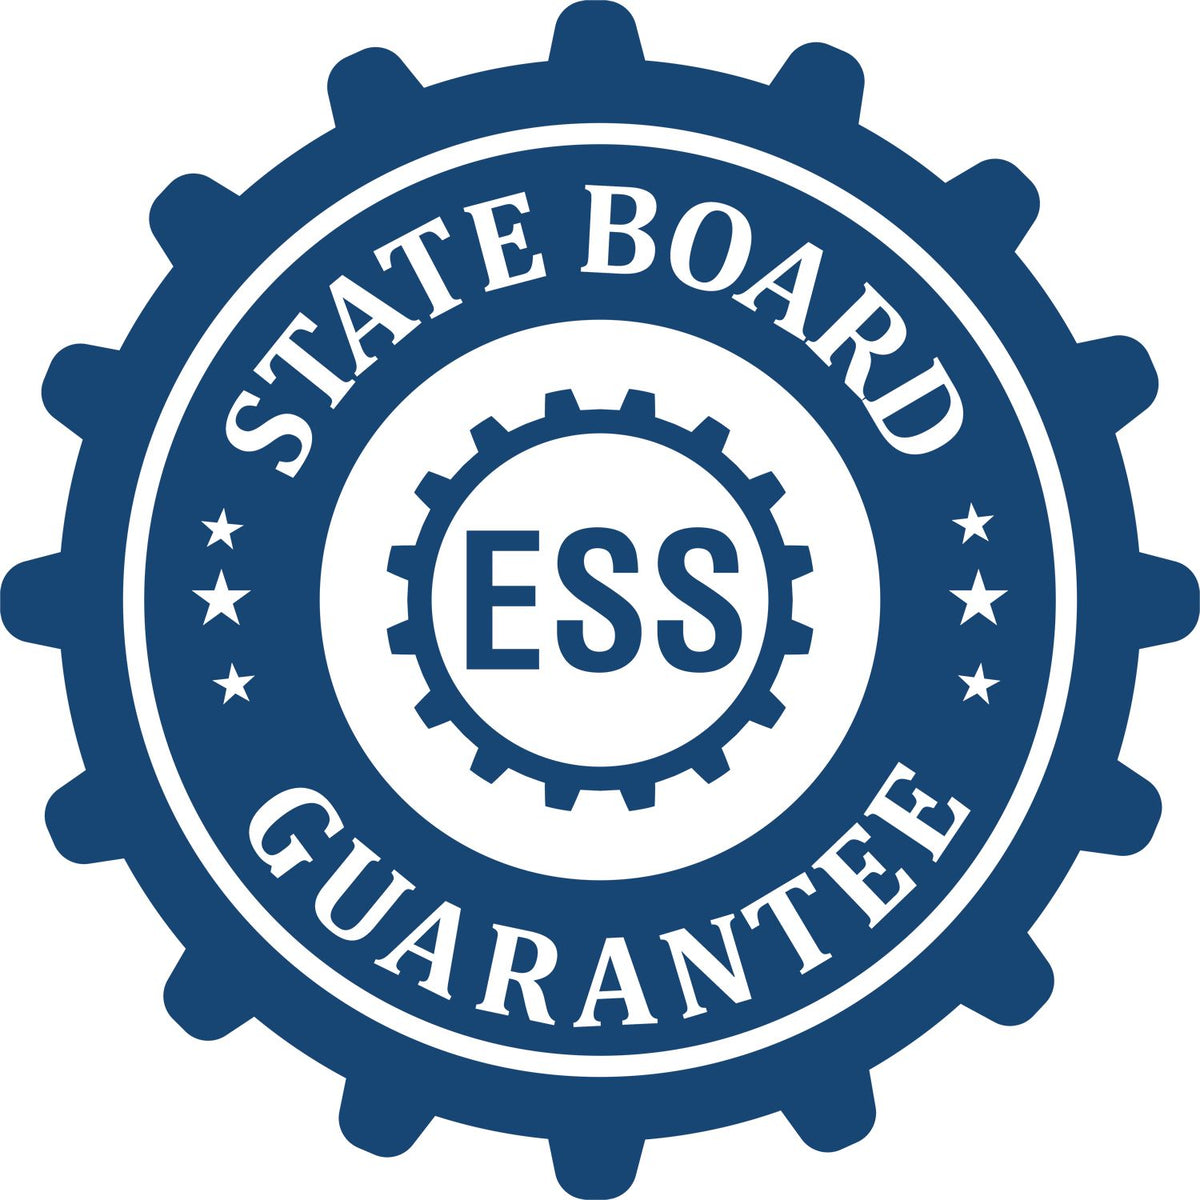 An emblem in a gear shape illustrating a state board guarantee for the Hybrid District of Columbia Land Surveyor Seal